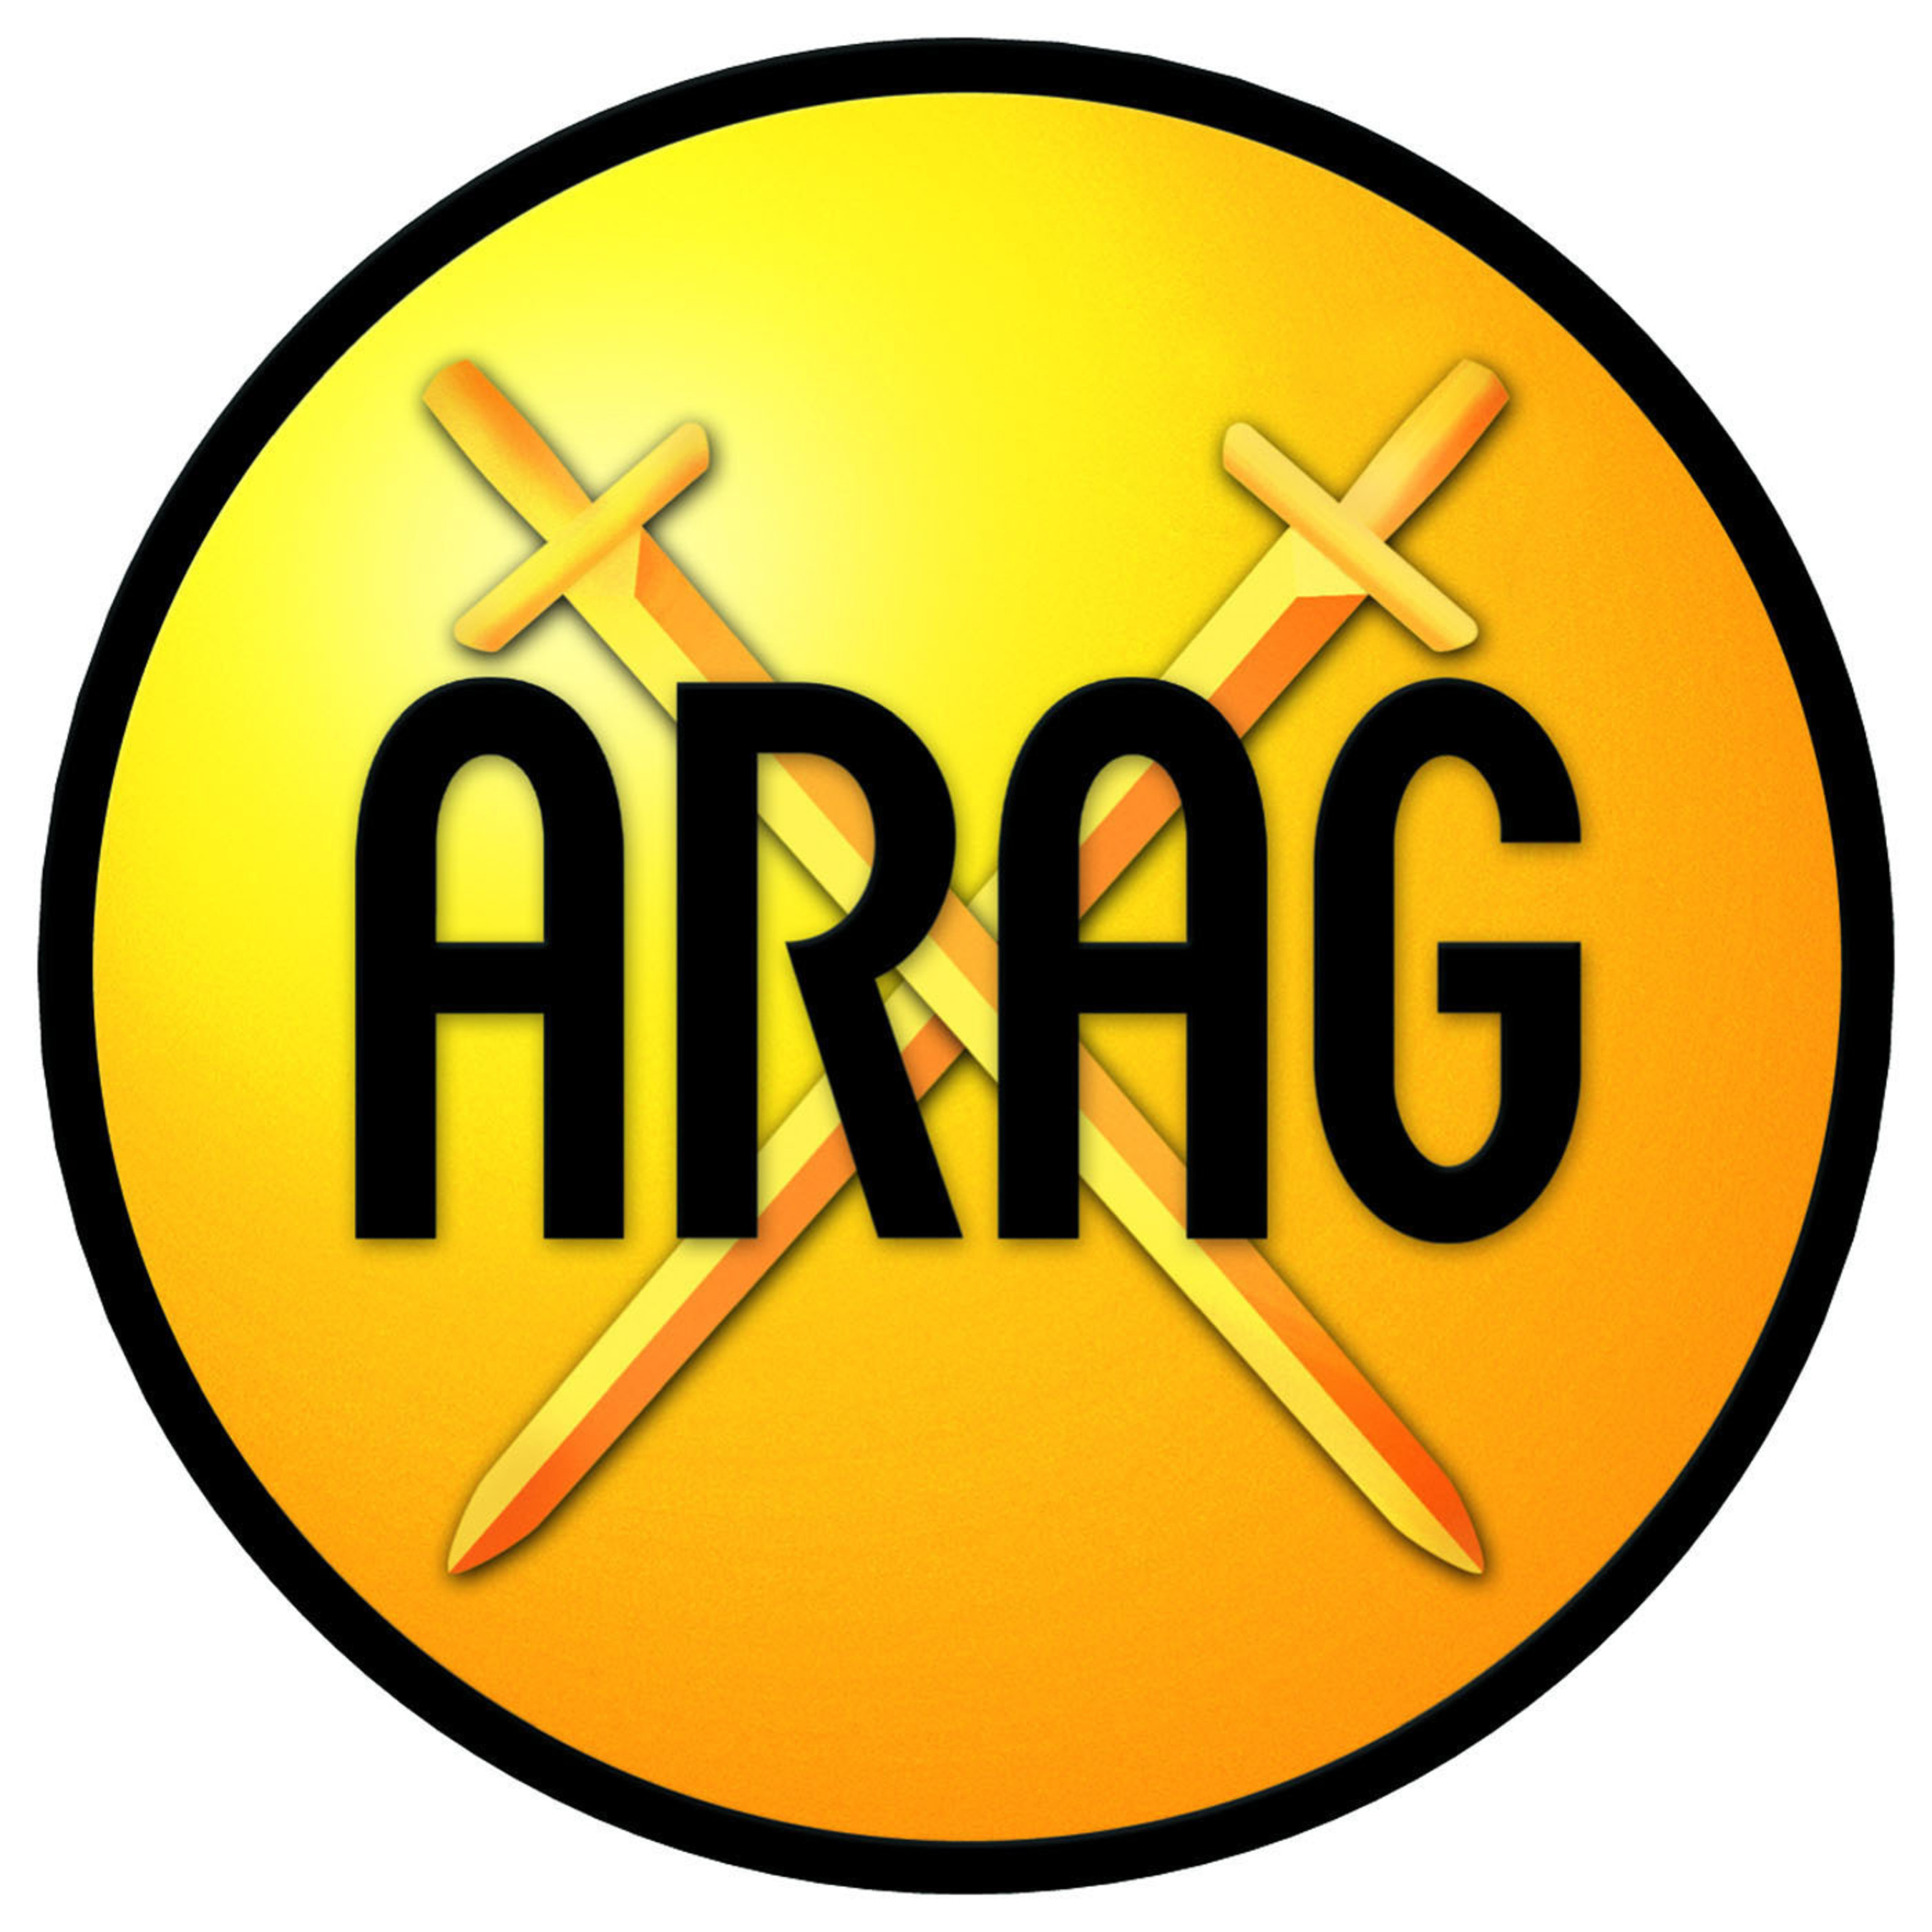 ARAG is a global provider of legal solutions.